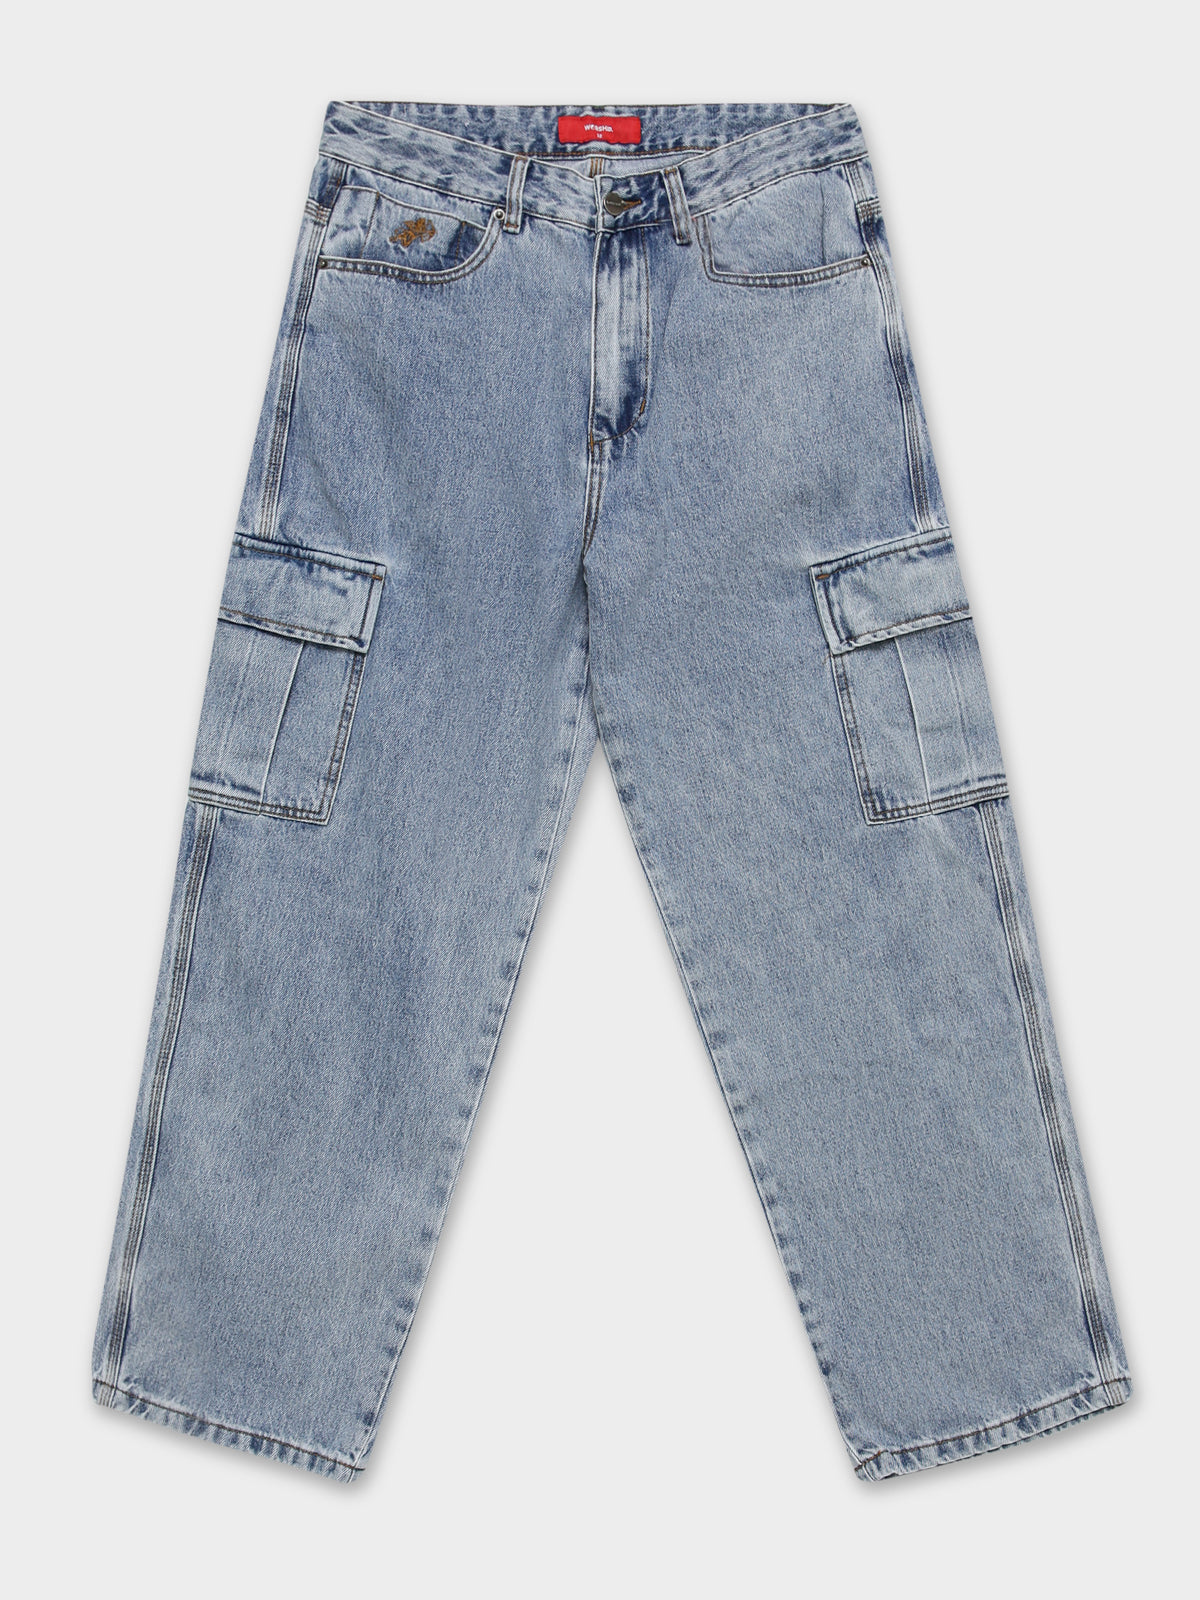 Big Lounger Cargo Jeans in Blue